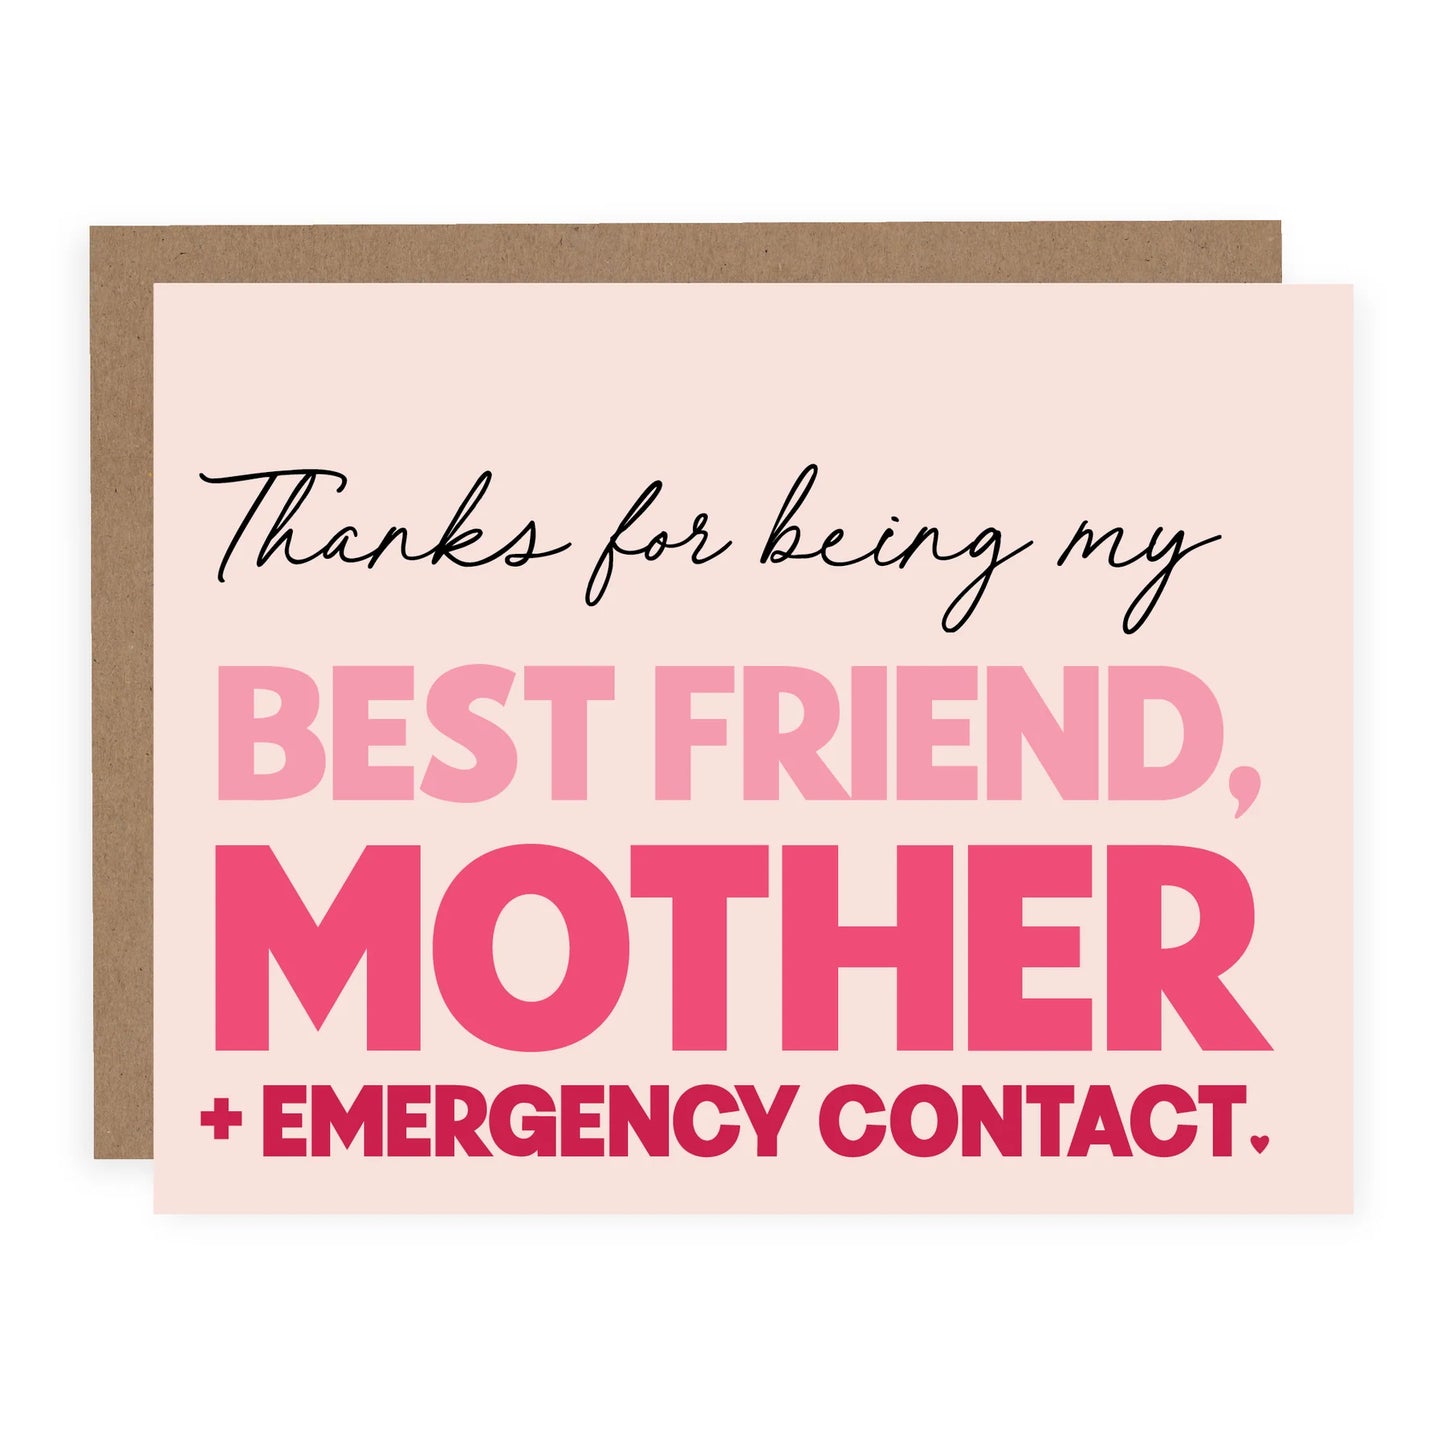 Thanks for being my best friend, Mother Card